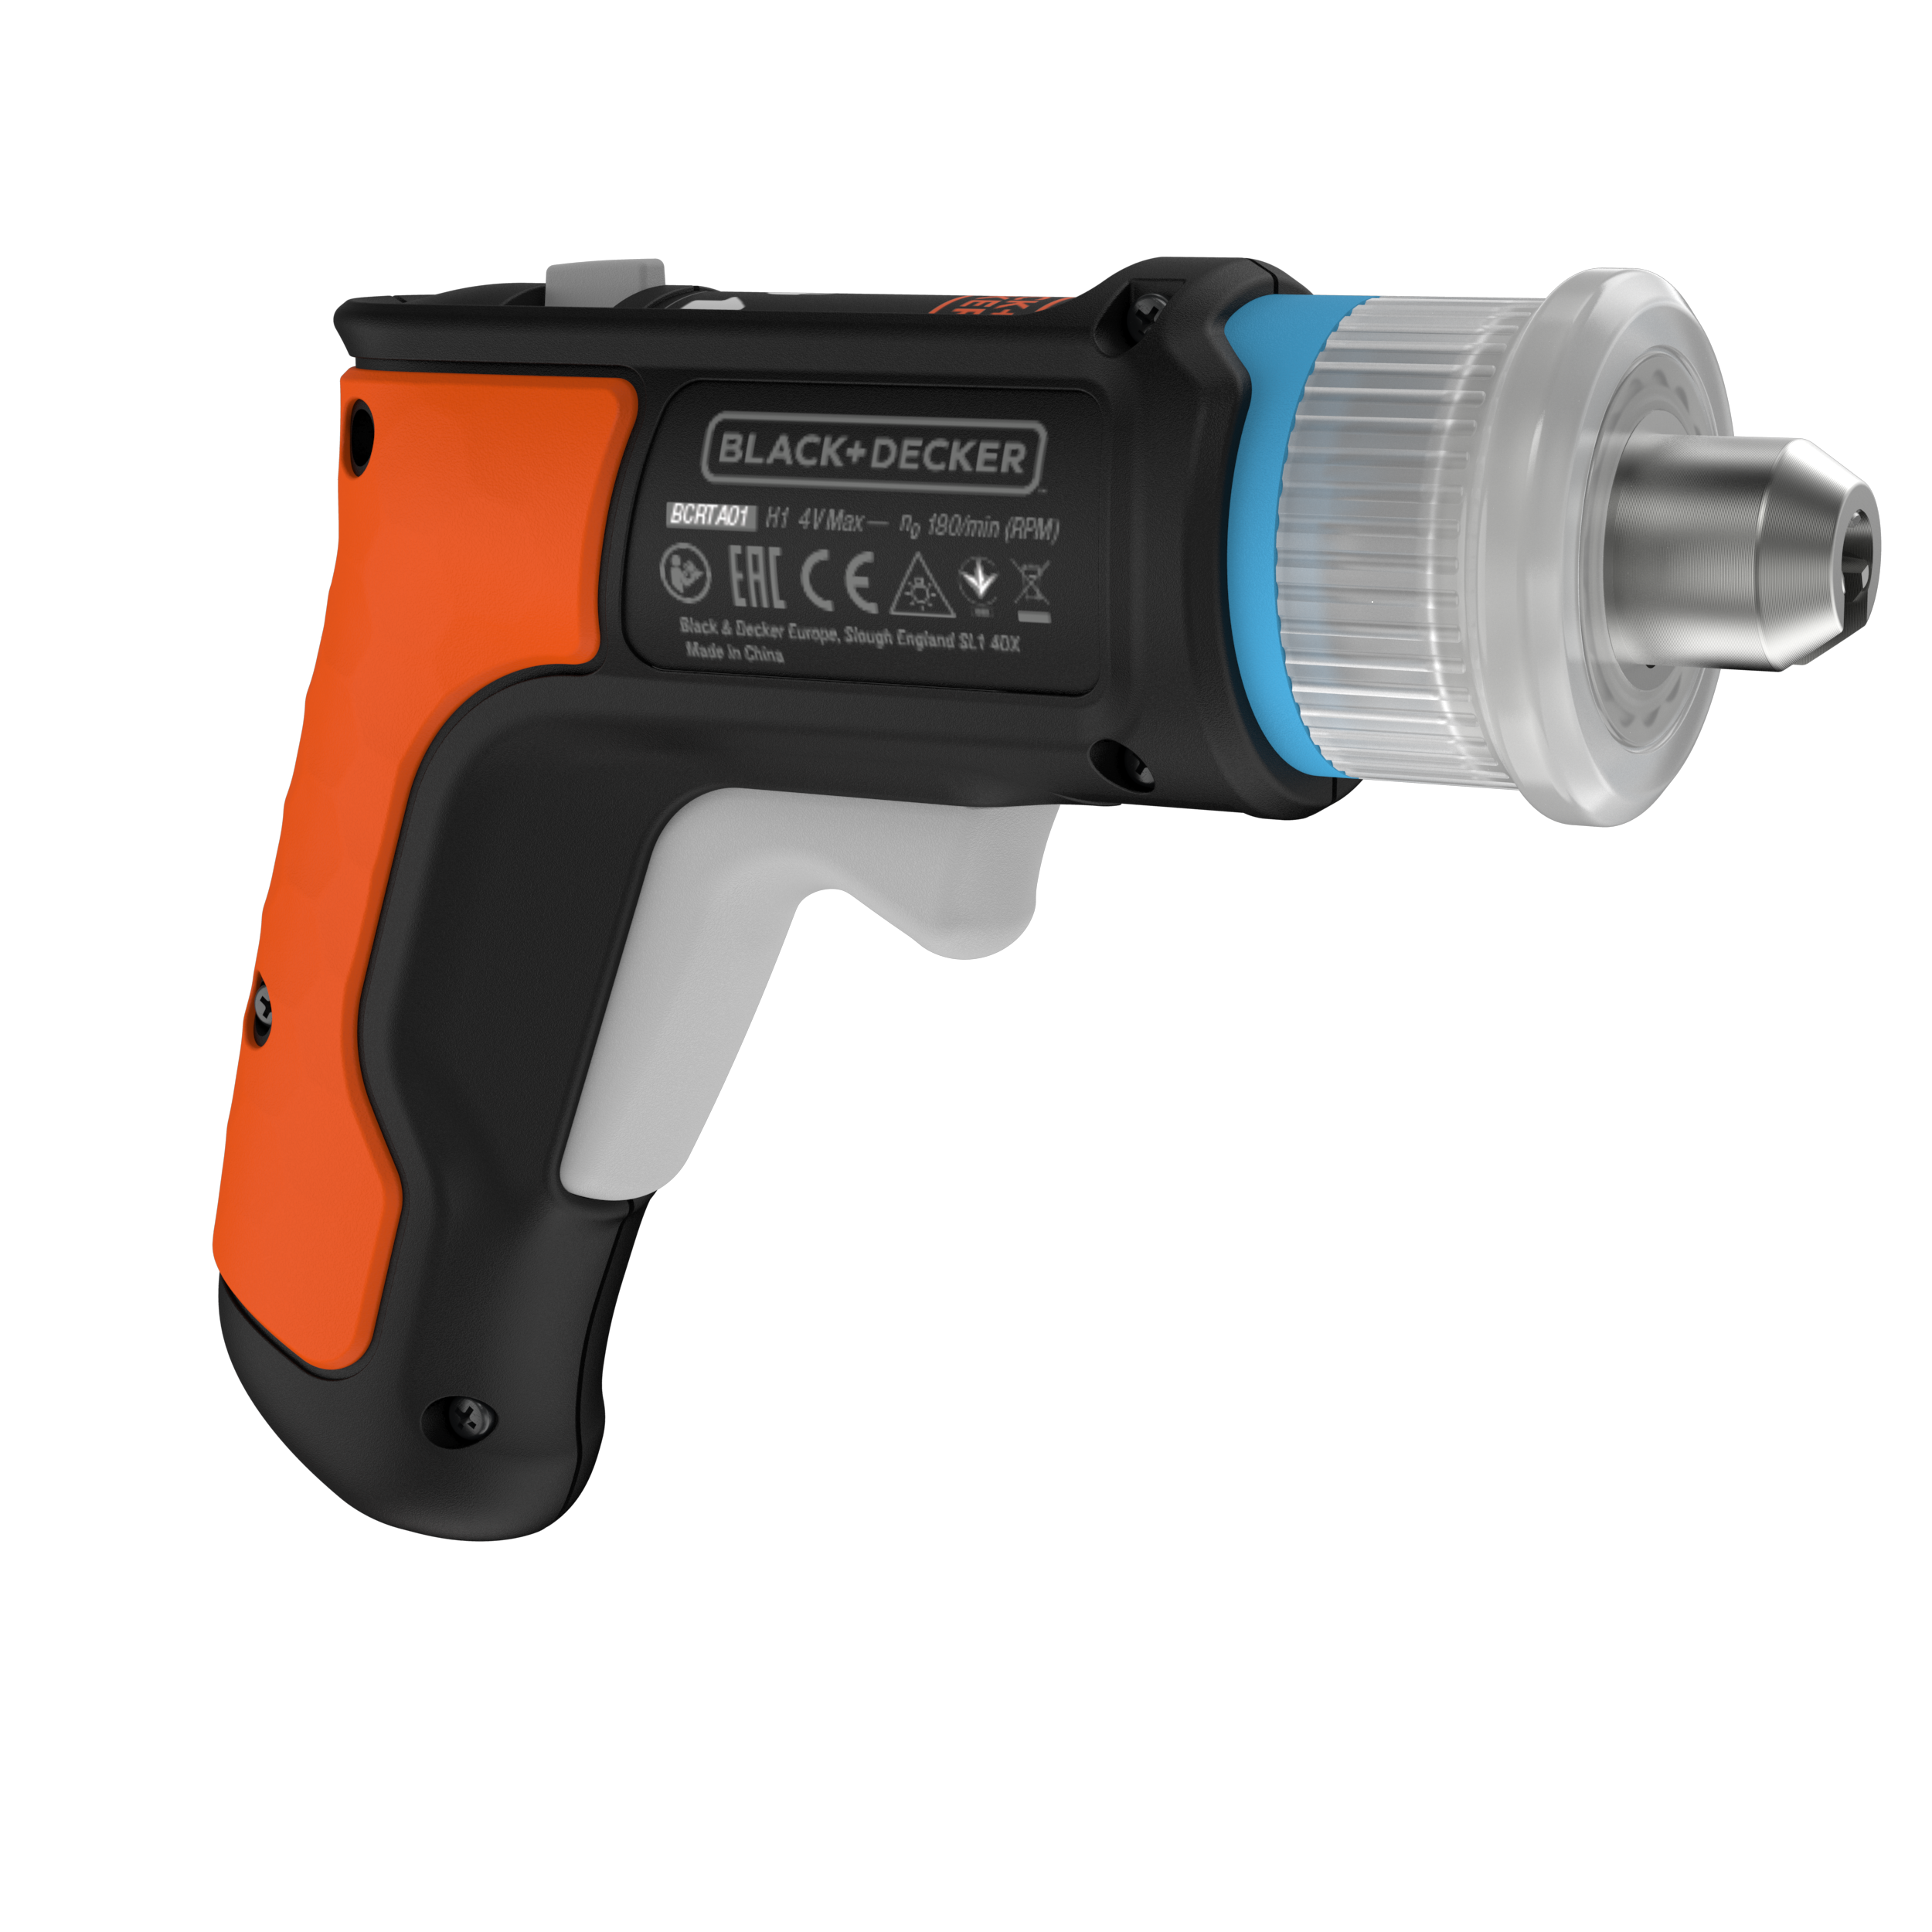  BLACK+DECKER Cordless Screwdriver, Alkaline (BCF601AA), 6 x 1 x  8 inches : Everything Else